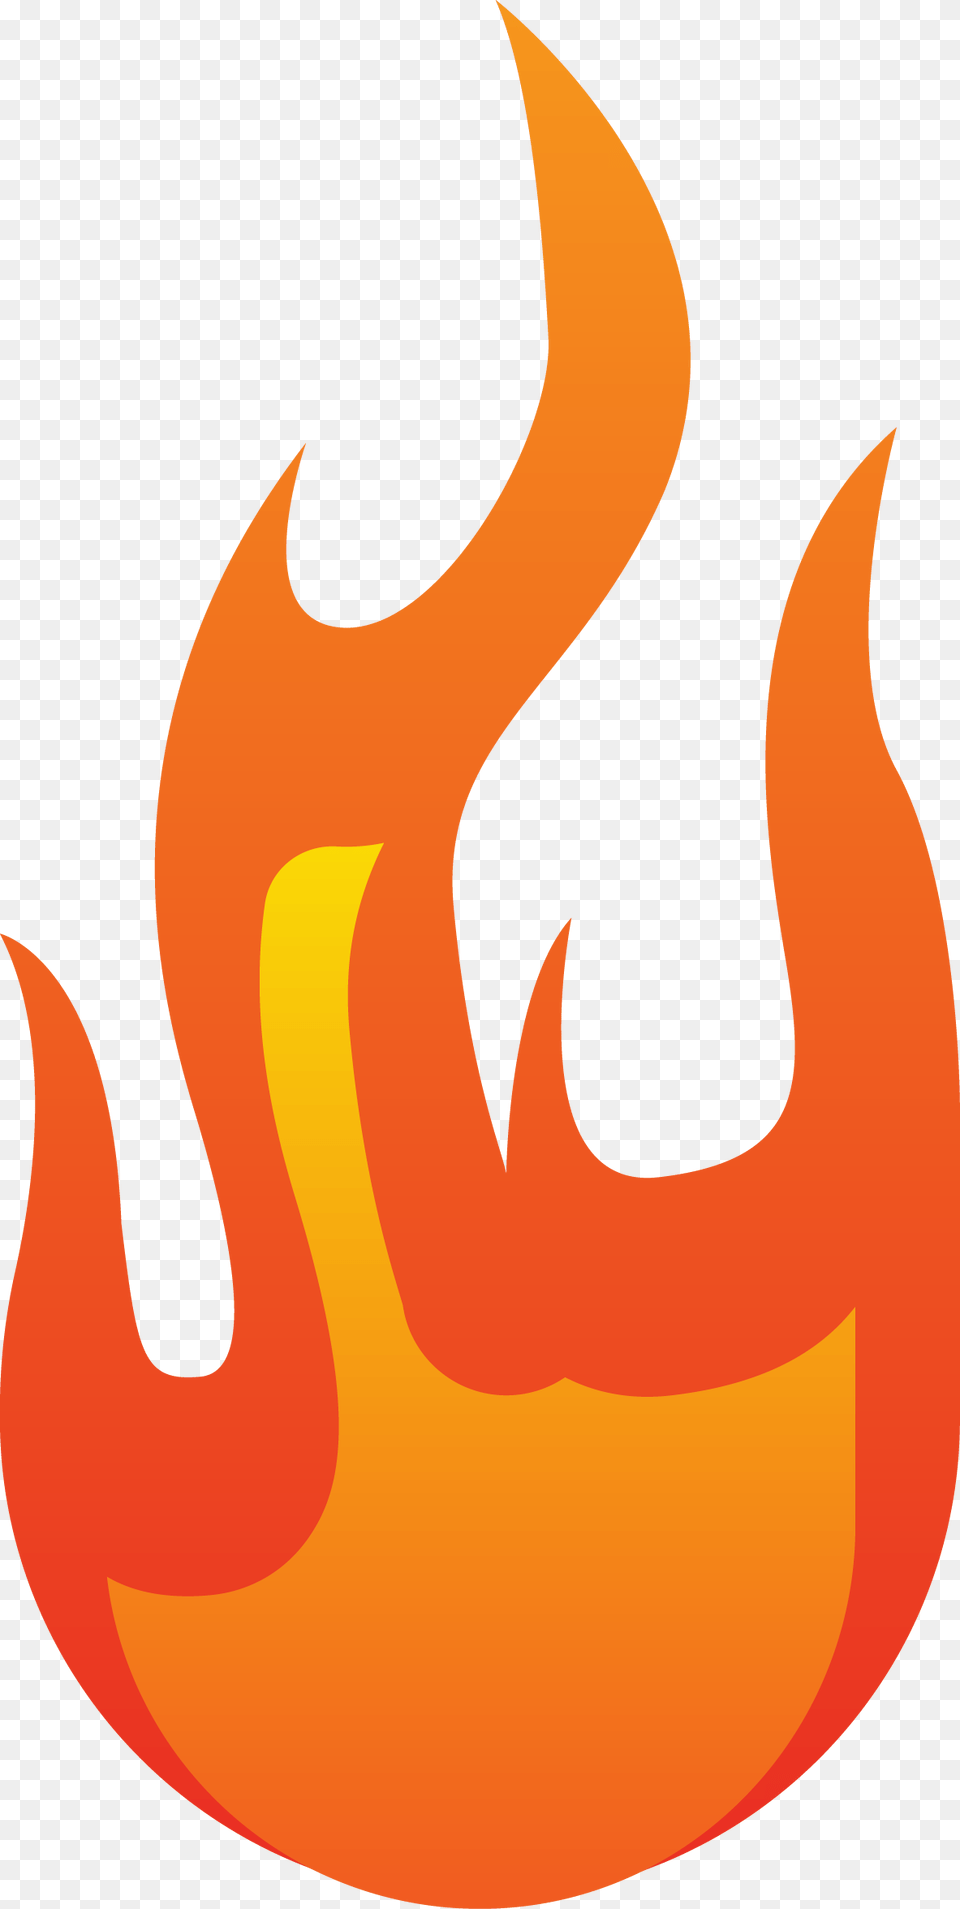 Flame Combustion Fire Euclidean Vector Illustration Png